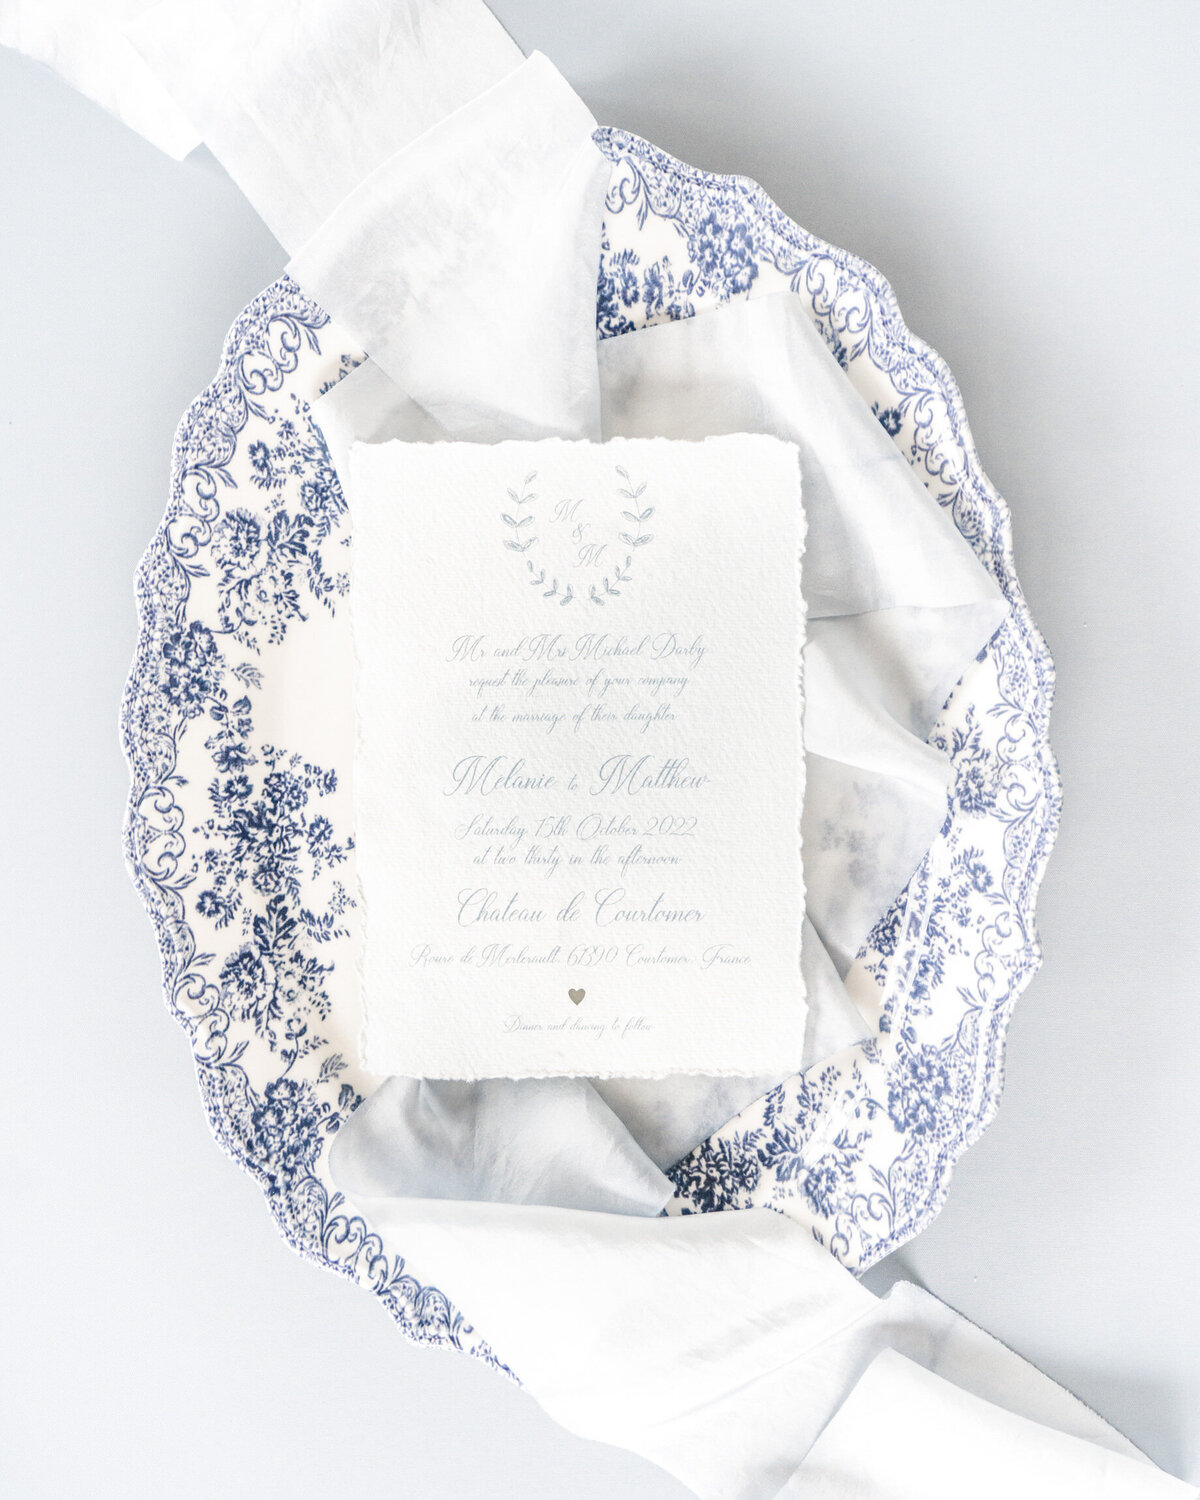 09-French-Chateau-de-Courtomer-Flatlay-Wedding-Stationery-Blue-Silver-White-Victoria-Amrose-Photography (3)